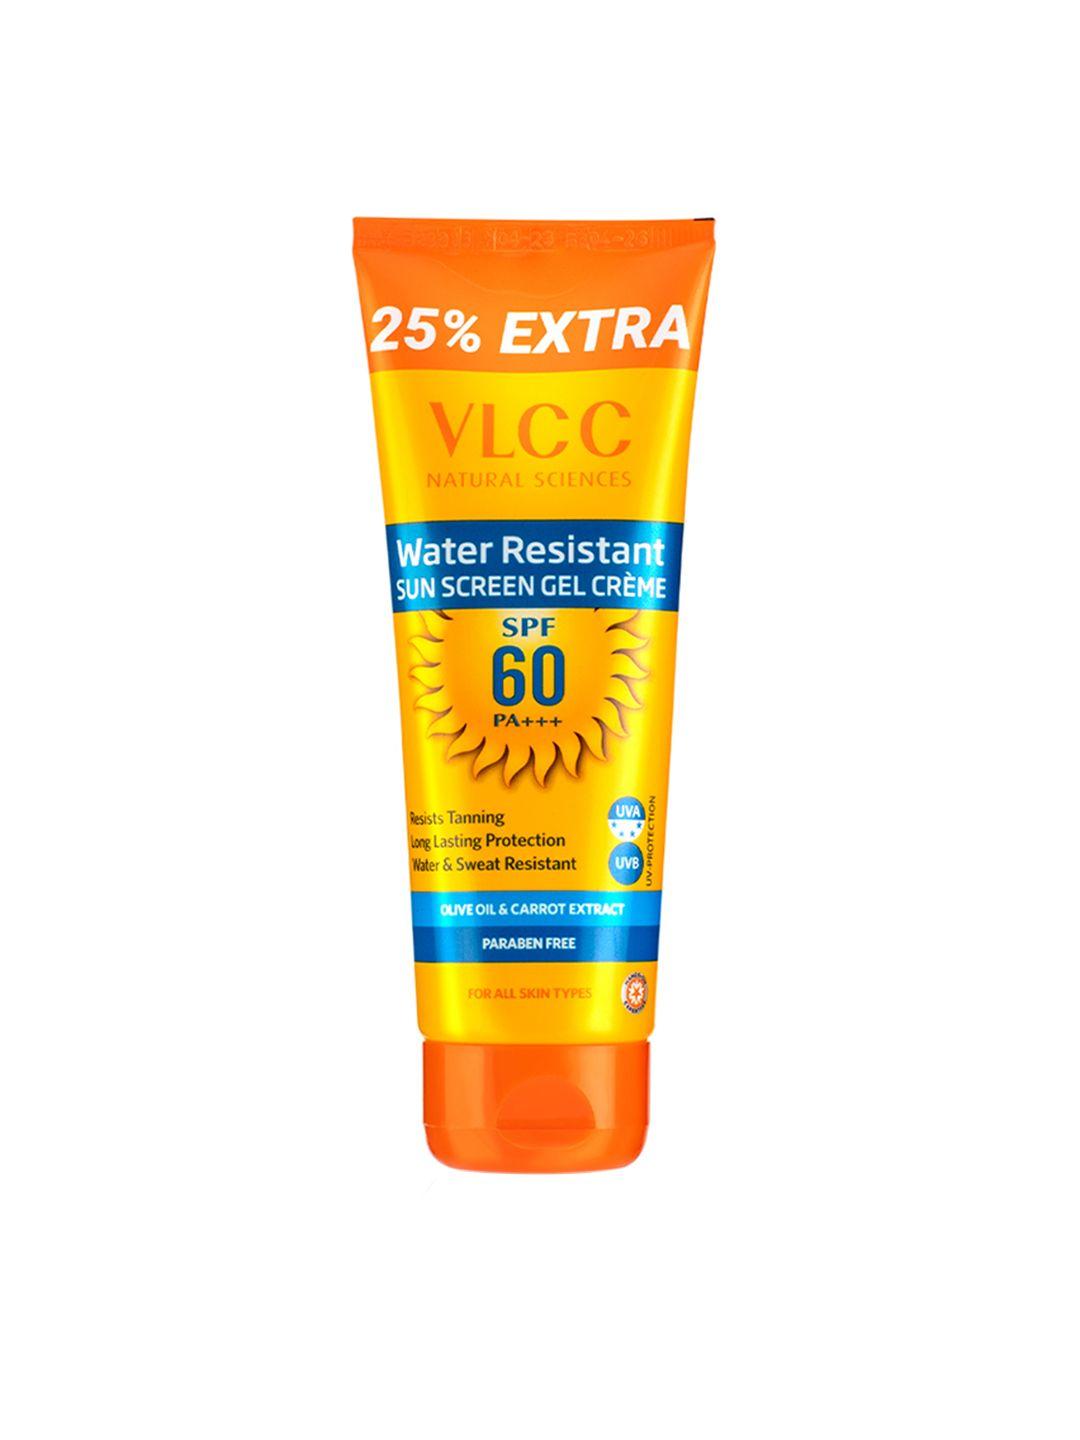 VLCC Water Resistant SPF 60 PA+++ Sunscreen Gel Cream - 100 g with 25 g Extra